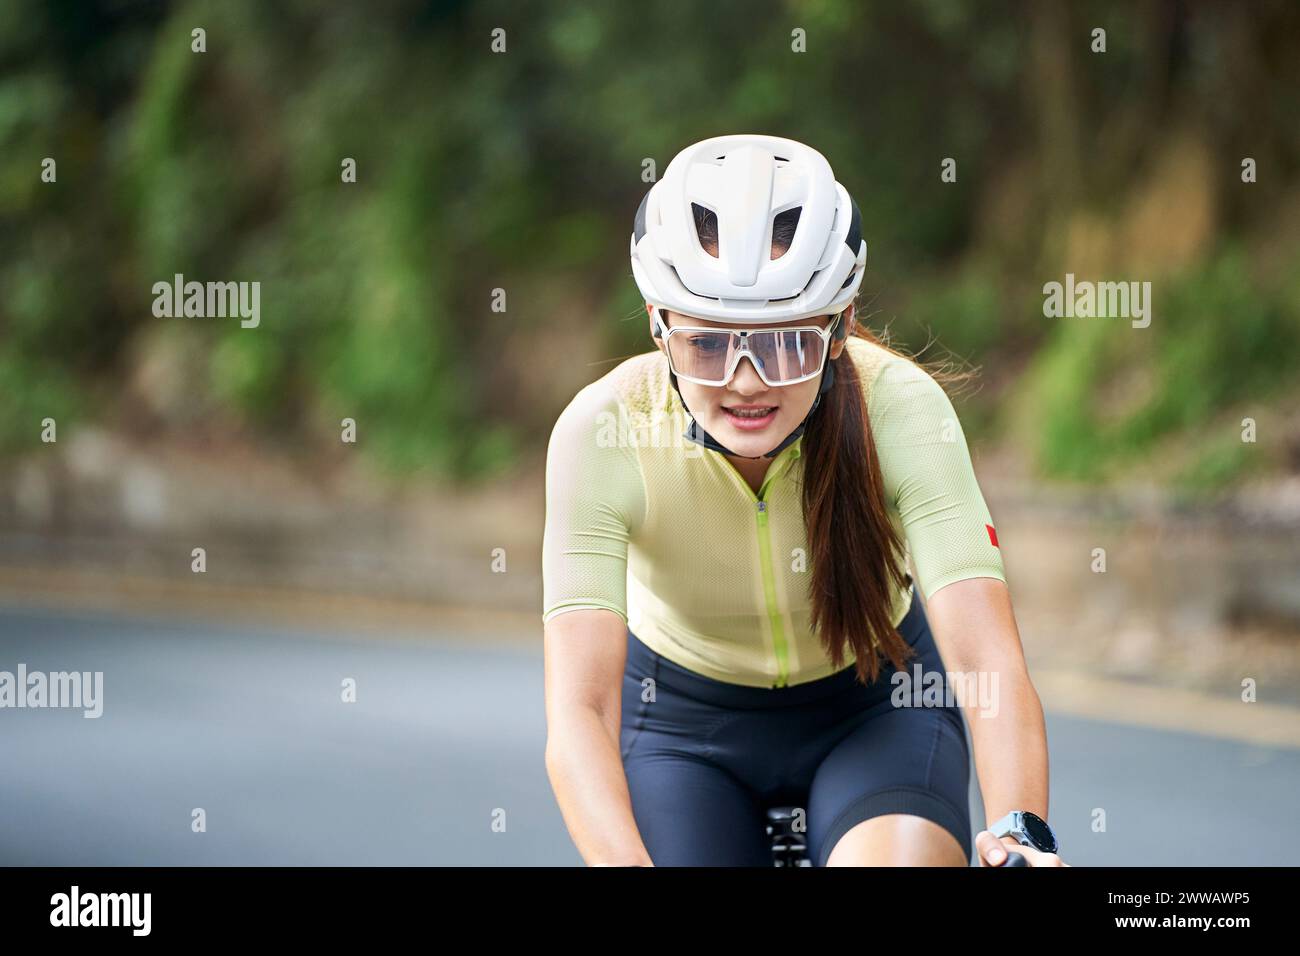 young asian woman wearing helmet riding bike on rural road Stock Photo